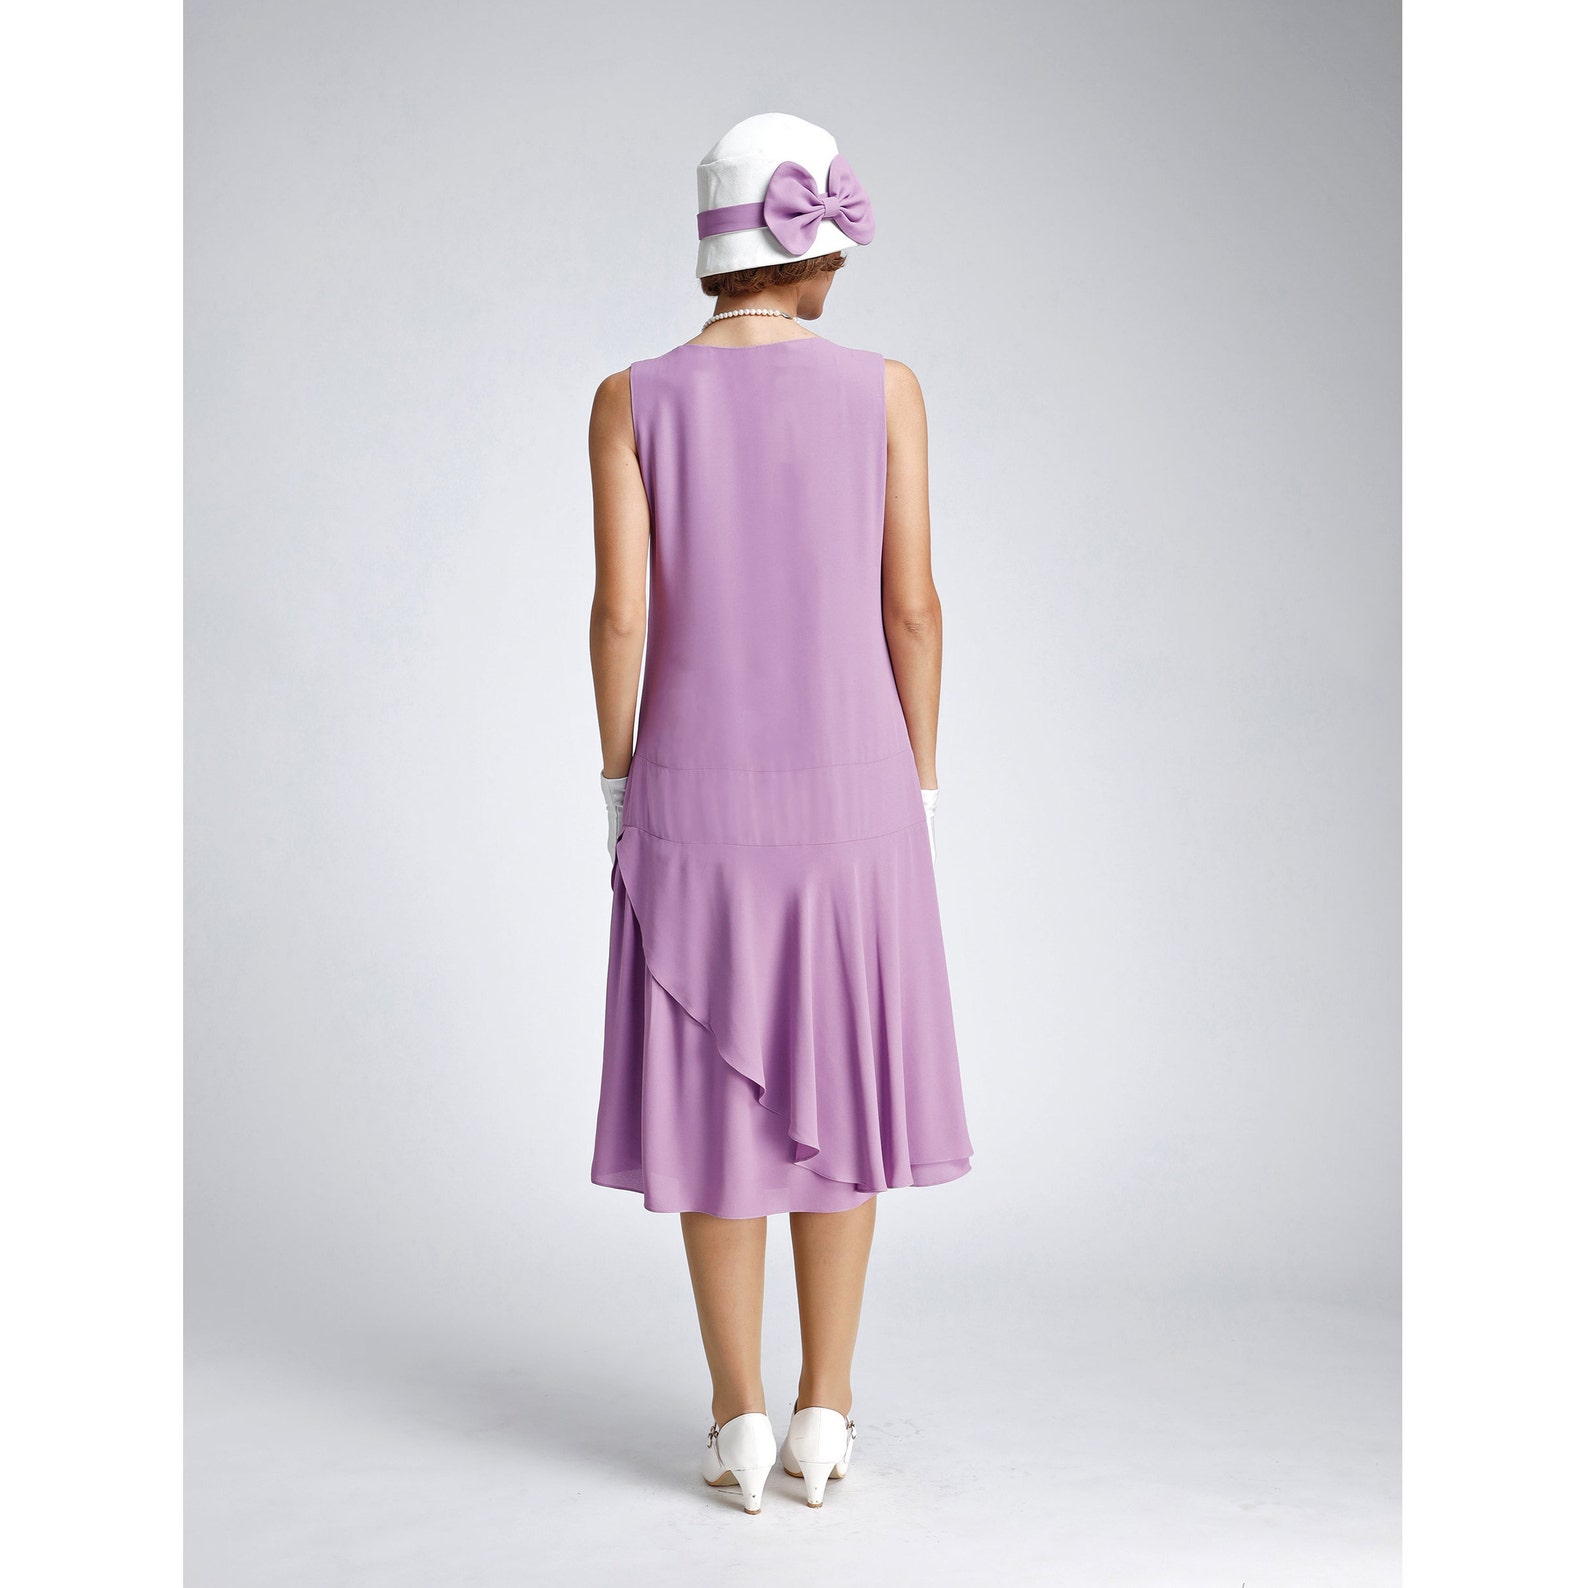 Lavender Crepe Georgette Dress 1920s Drop Waist Style With a - Etsy